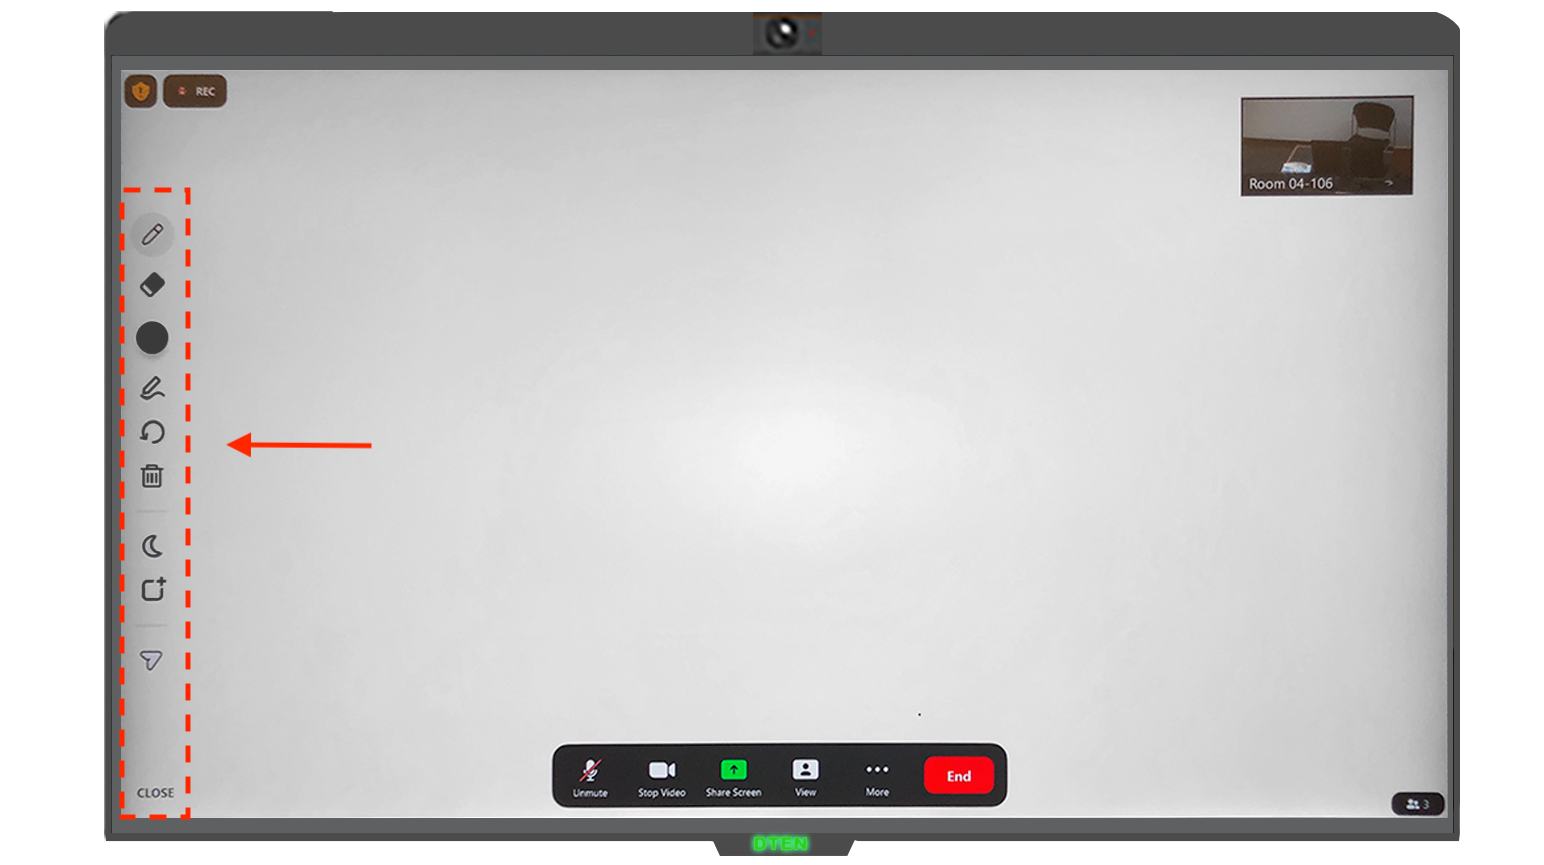 Zoom whiteboard screen with dashed red lines highlighted the different buttons on the left side of the screen. Descriptions of buttons below this image.